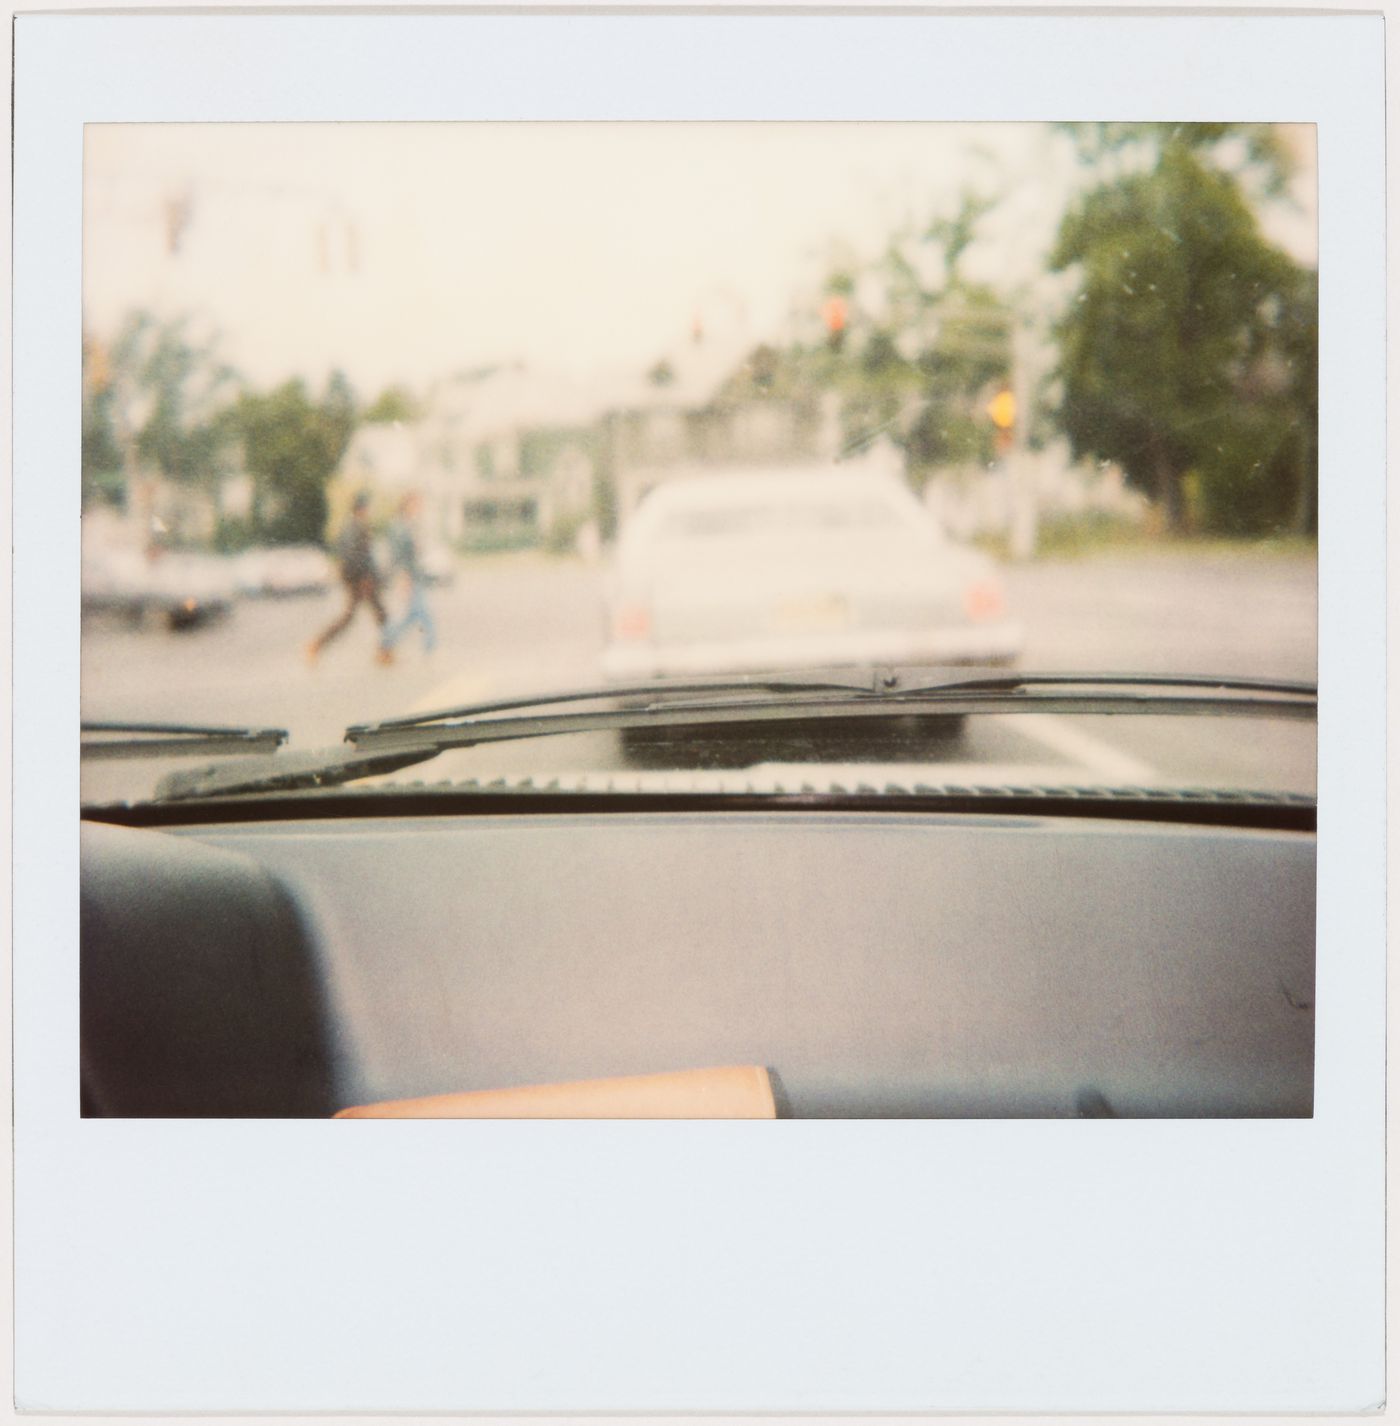 View of a street from a car windshield, United States